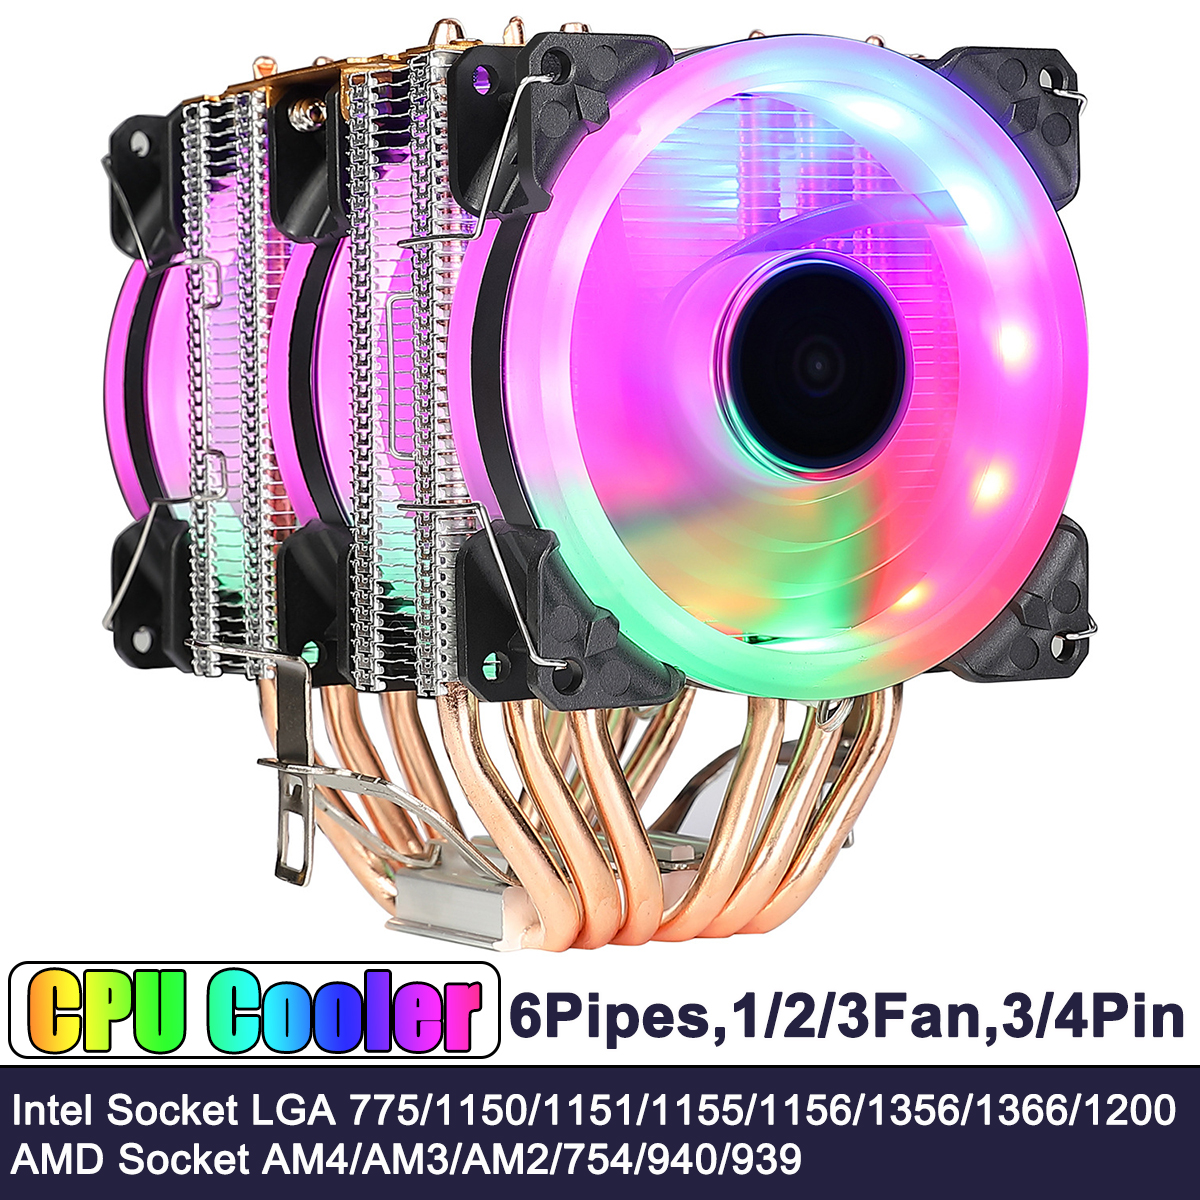 EVESKY-CPU-Cooling-Fan-123-Fans-34-Pin-6-Heat-Pipes-RGBWithout-Light-Silent-Computer-Case-Cooler-CPU-1937014-5